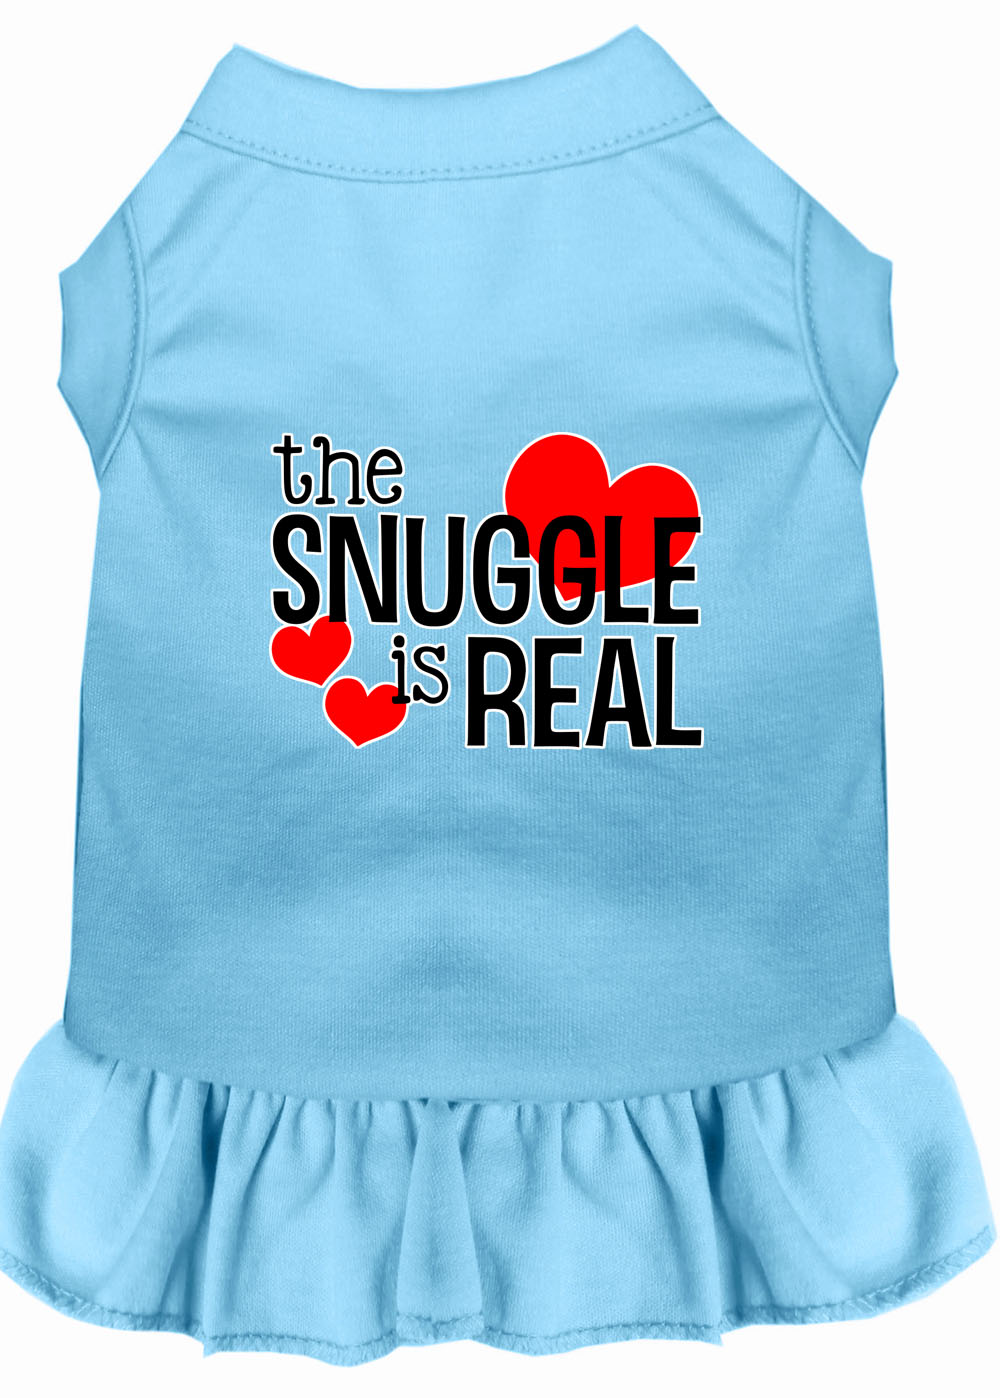 The Snuggle is Real Screen Print Dog Dress Baby Blue XL